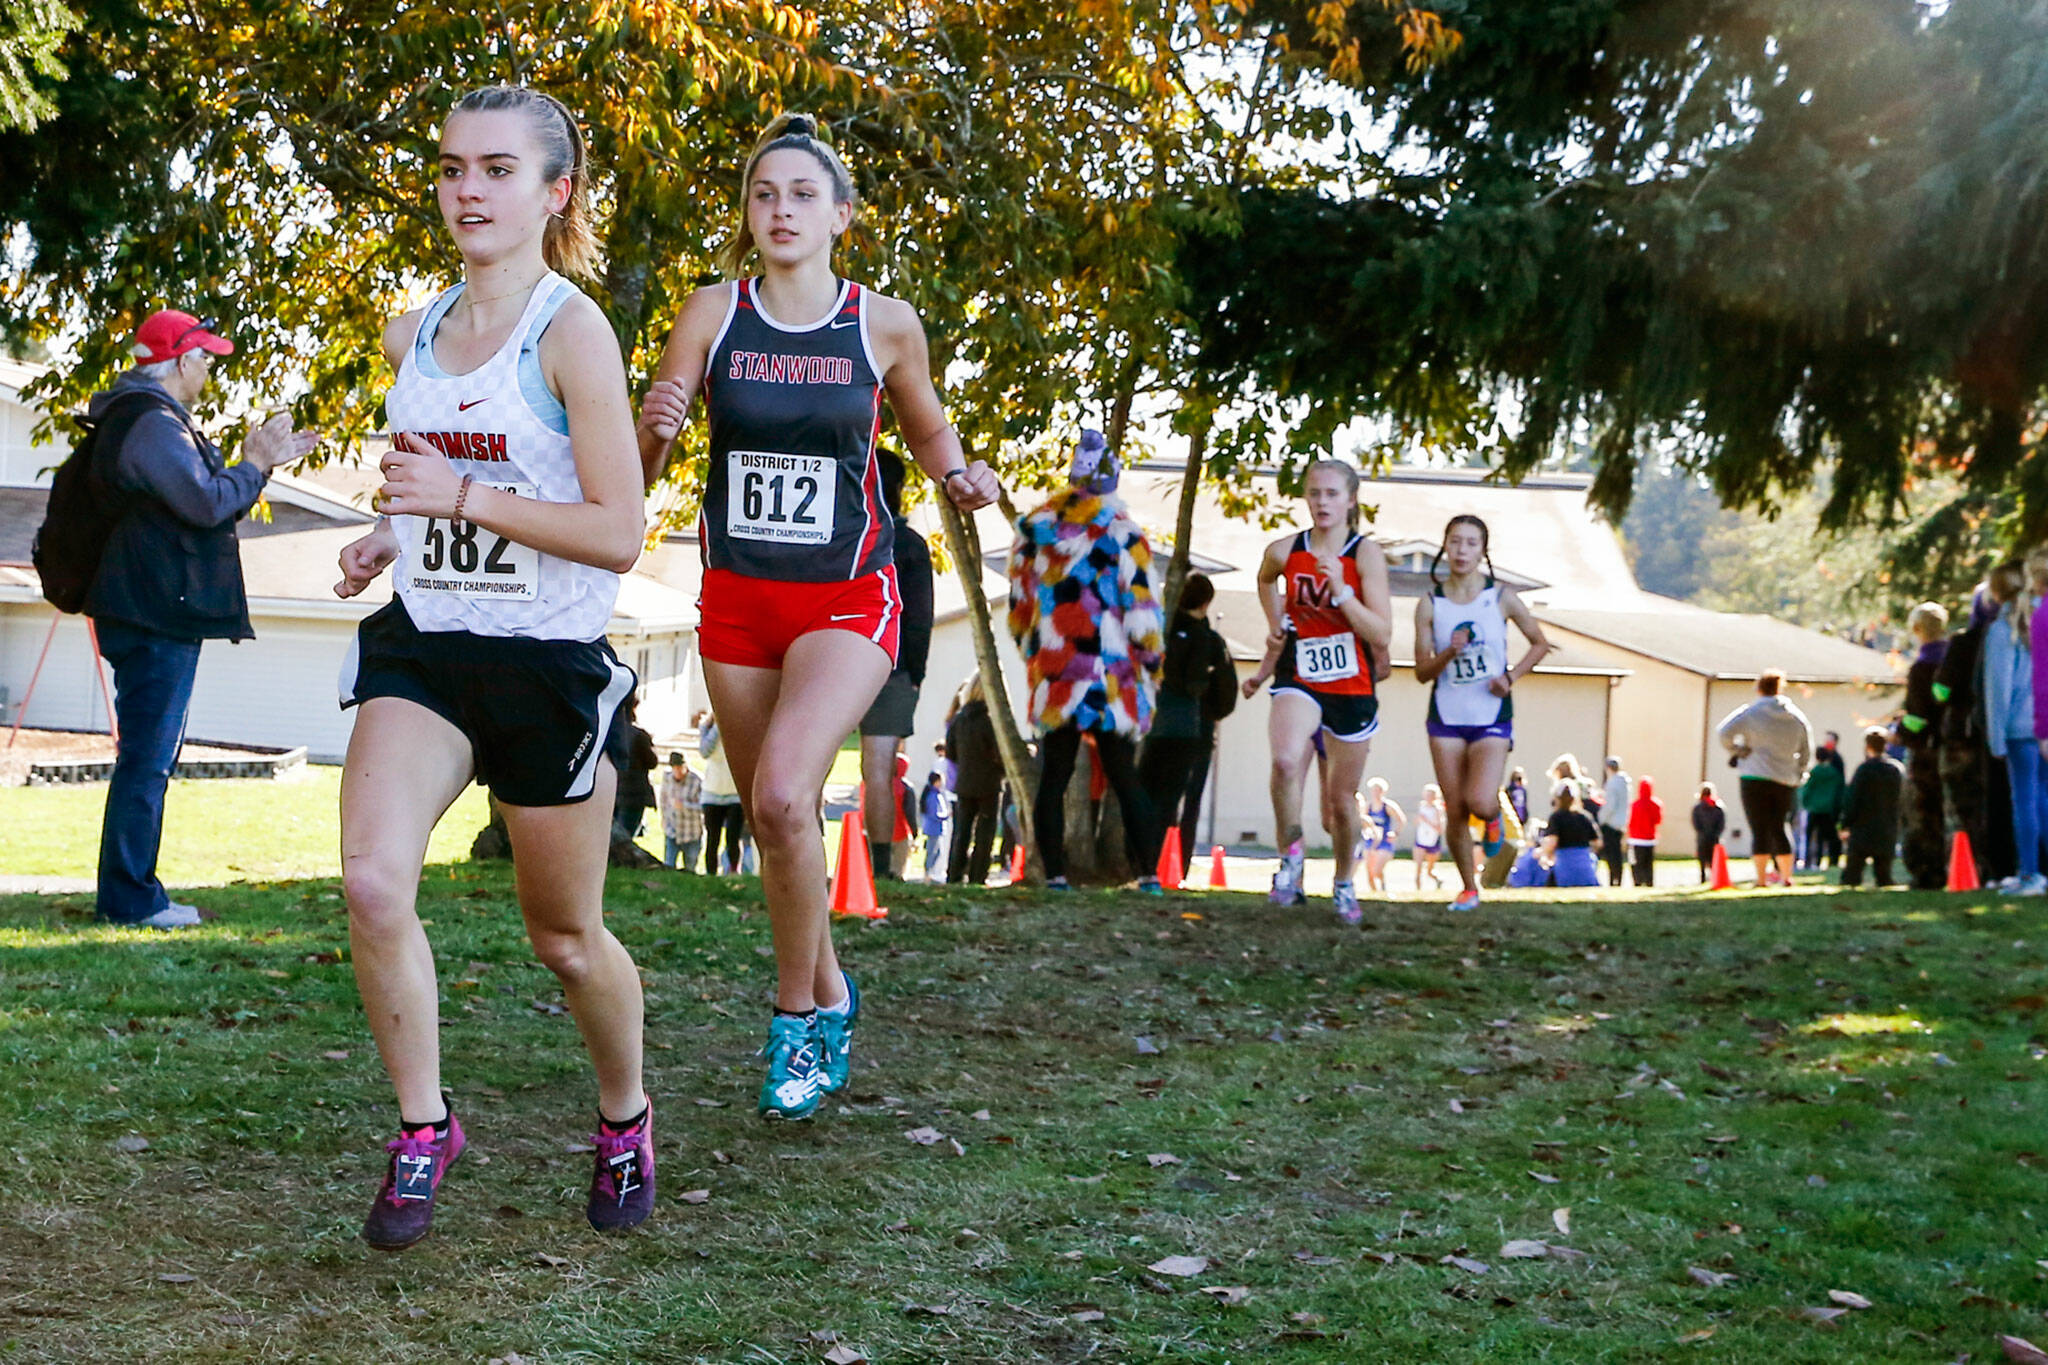 Snohomish sophomore Paige Gerrard (left) and Stanwood senior Leia Jones are among the top local runners to watch in Saturday’s state cross country championships. (Kevin Clark / The Herald)